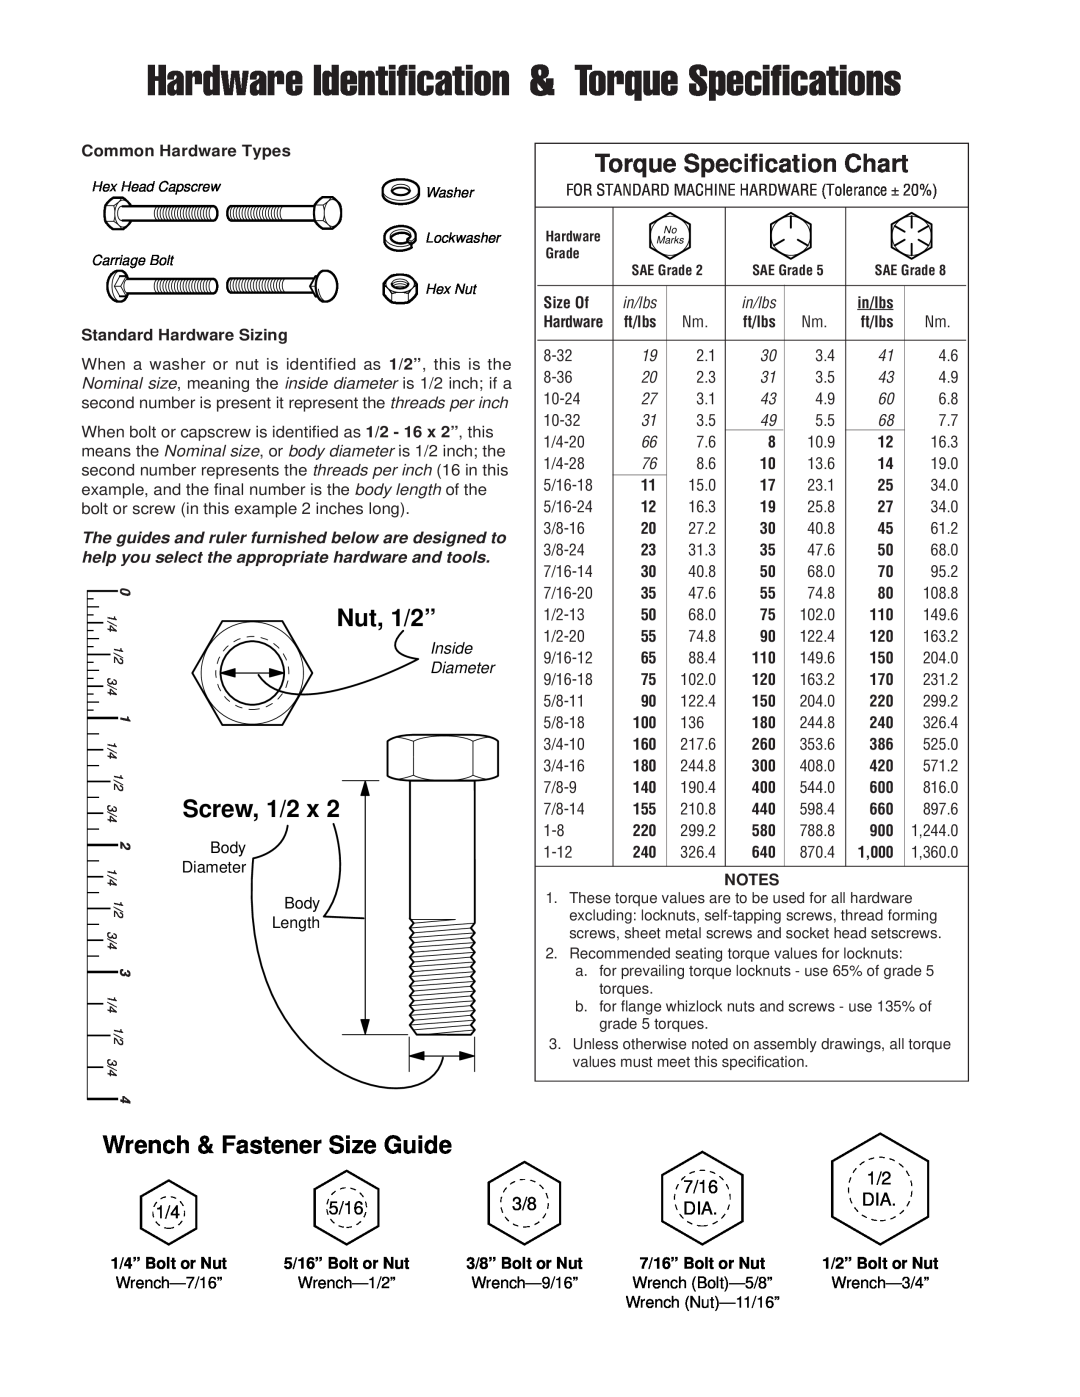 Simplicity Express Series manual Wrench & Fastener Size Guide, Hardware Identification & Torque Specifications, Nut, 1/2” 